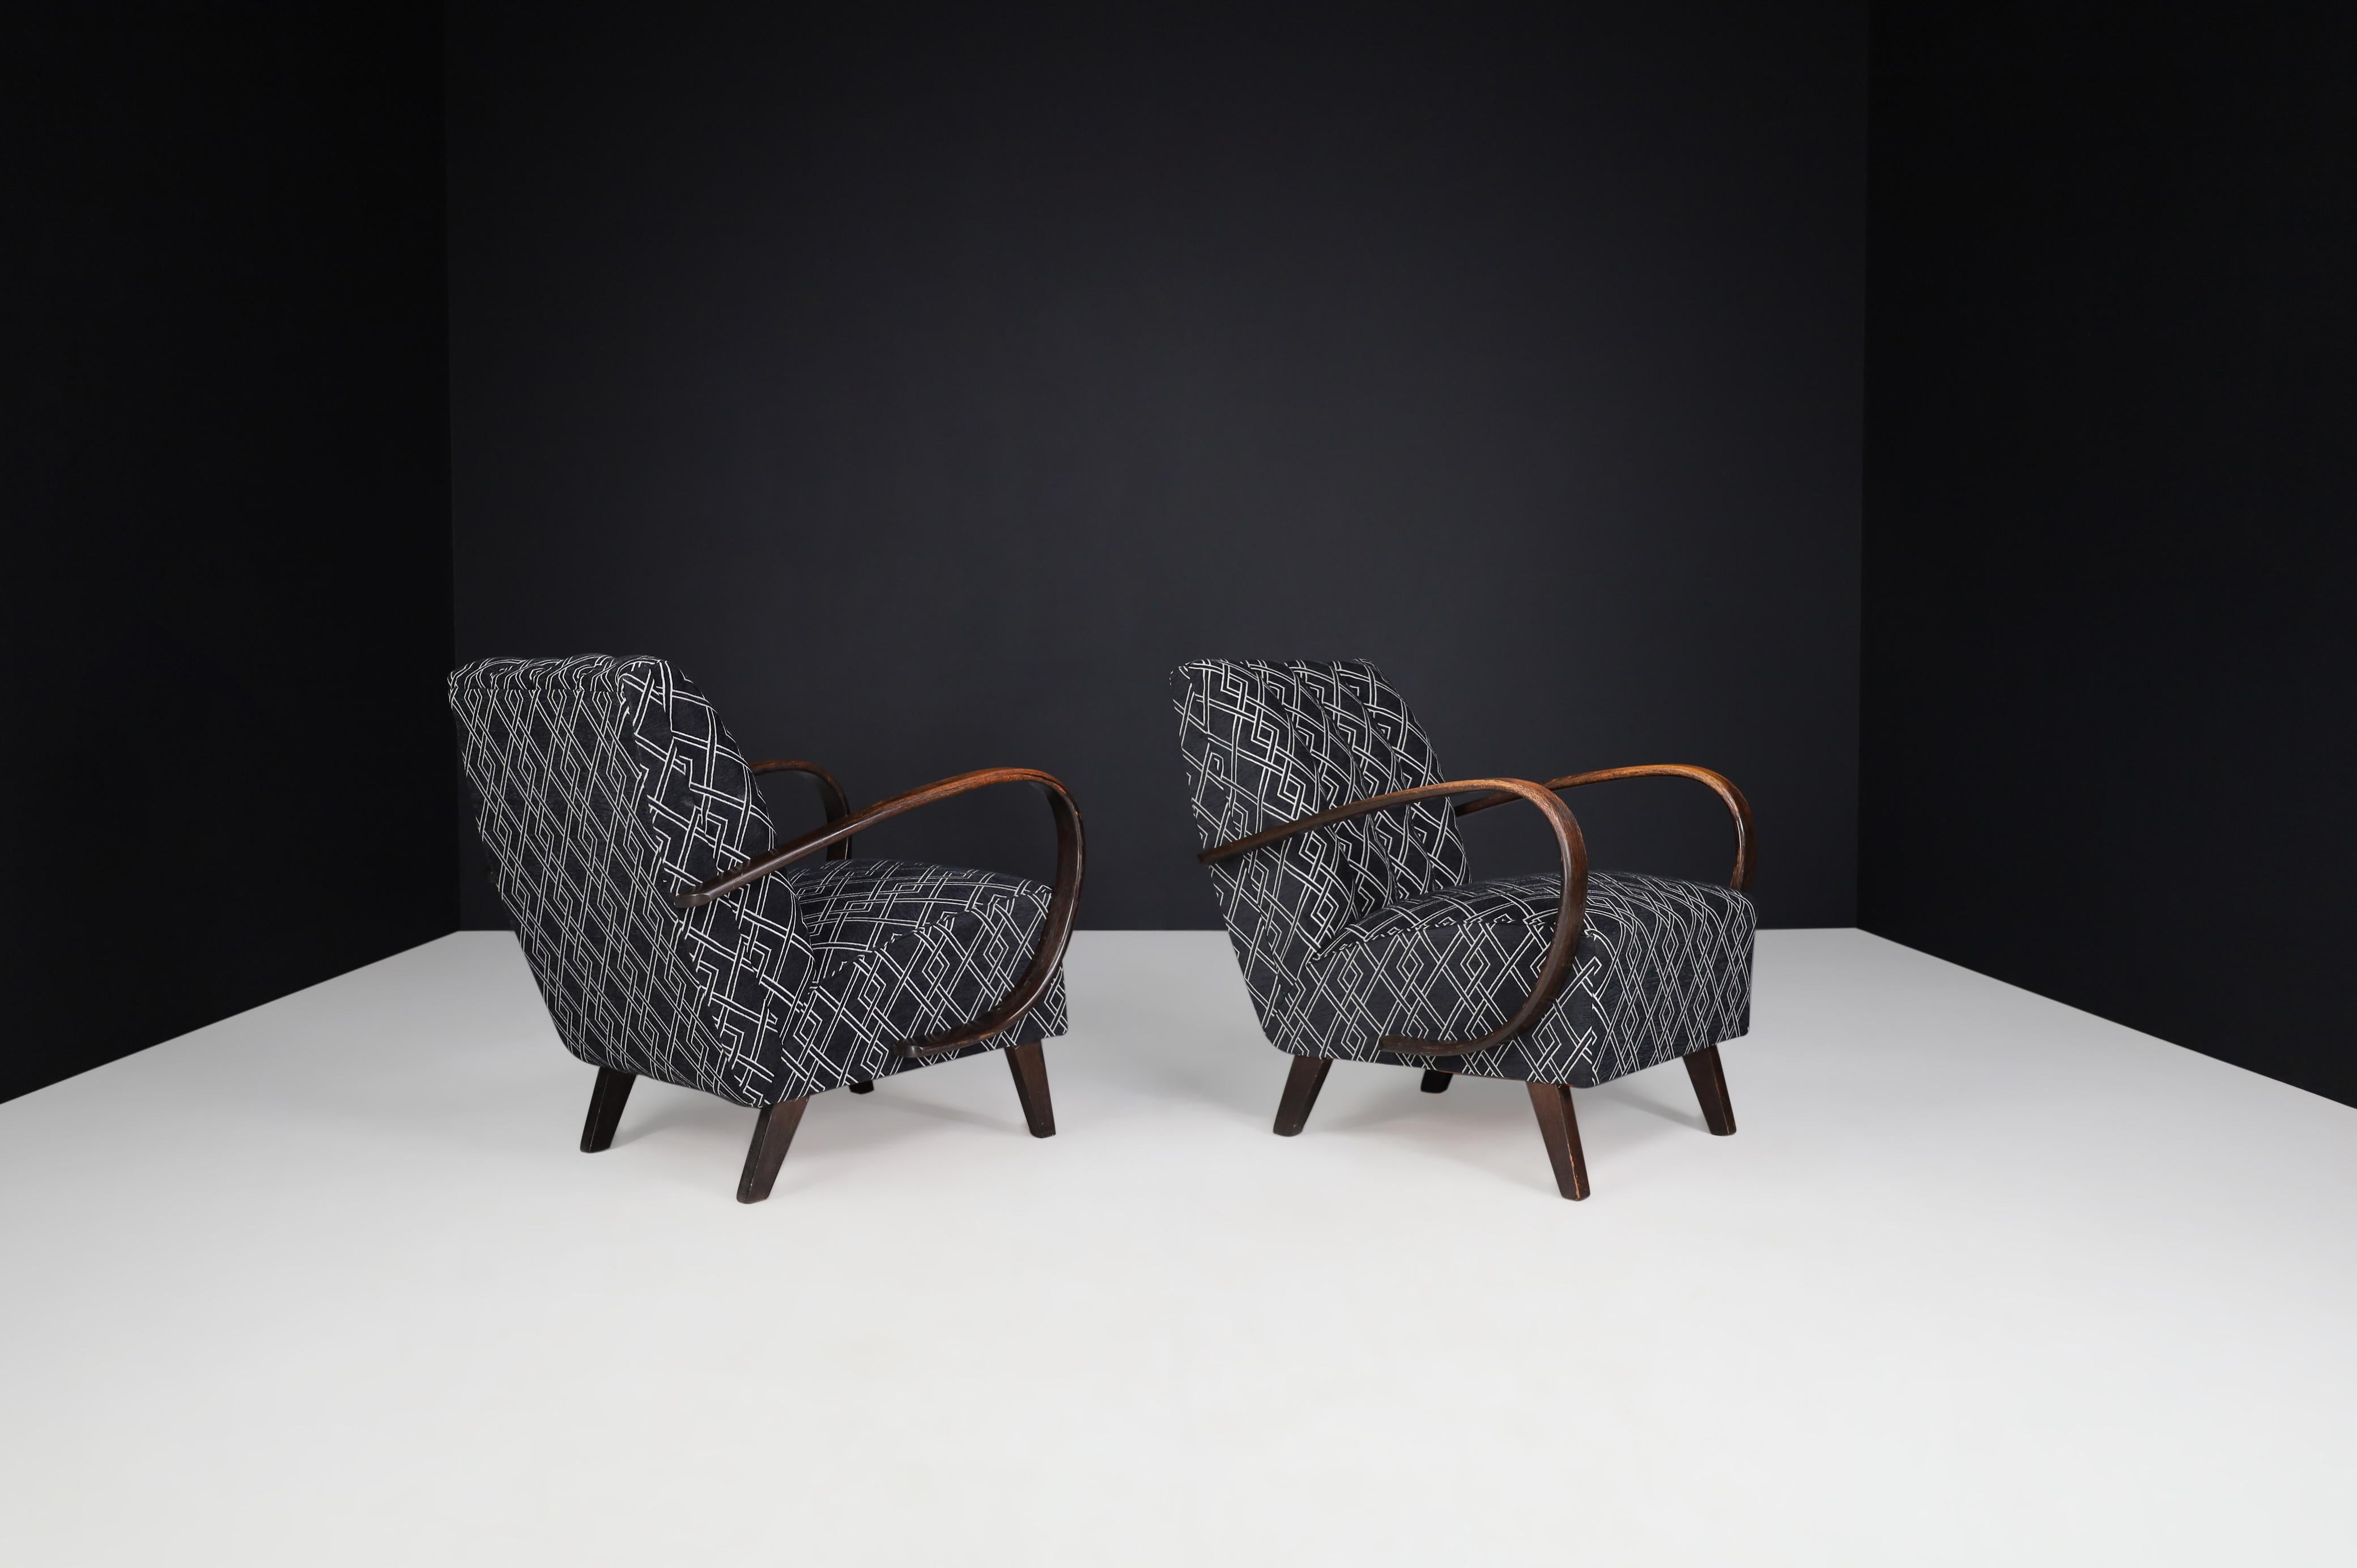 Jindrich Halabala re-upholstered patinated bentwood lounge chairs, 1940s Czech Republic.

These iconic set lounge chairs are from Czechia, circa 1940. Produced by Thonet, these lounge chairs (model H-227), designed by Jindrich Halabala, are a norm